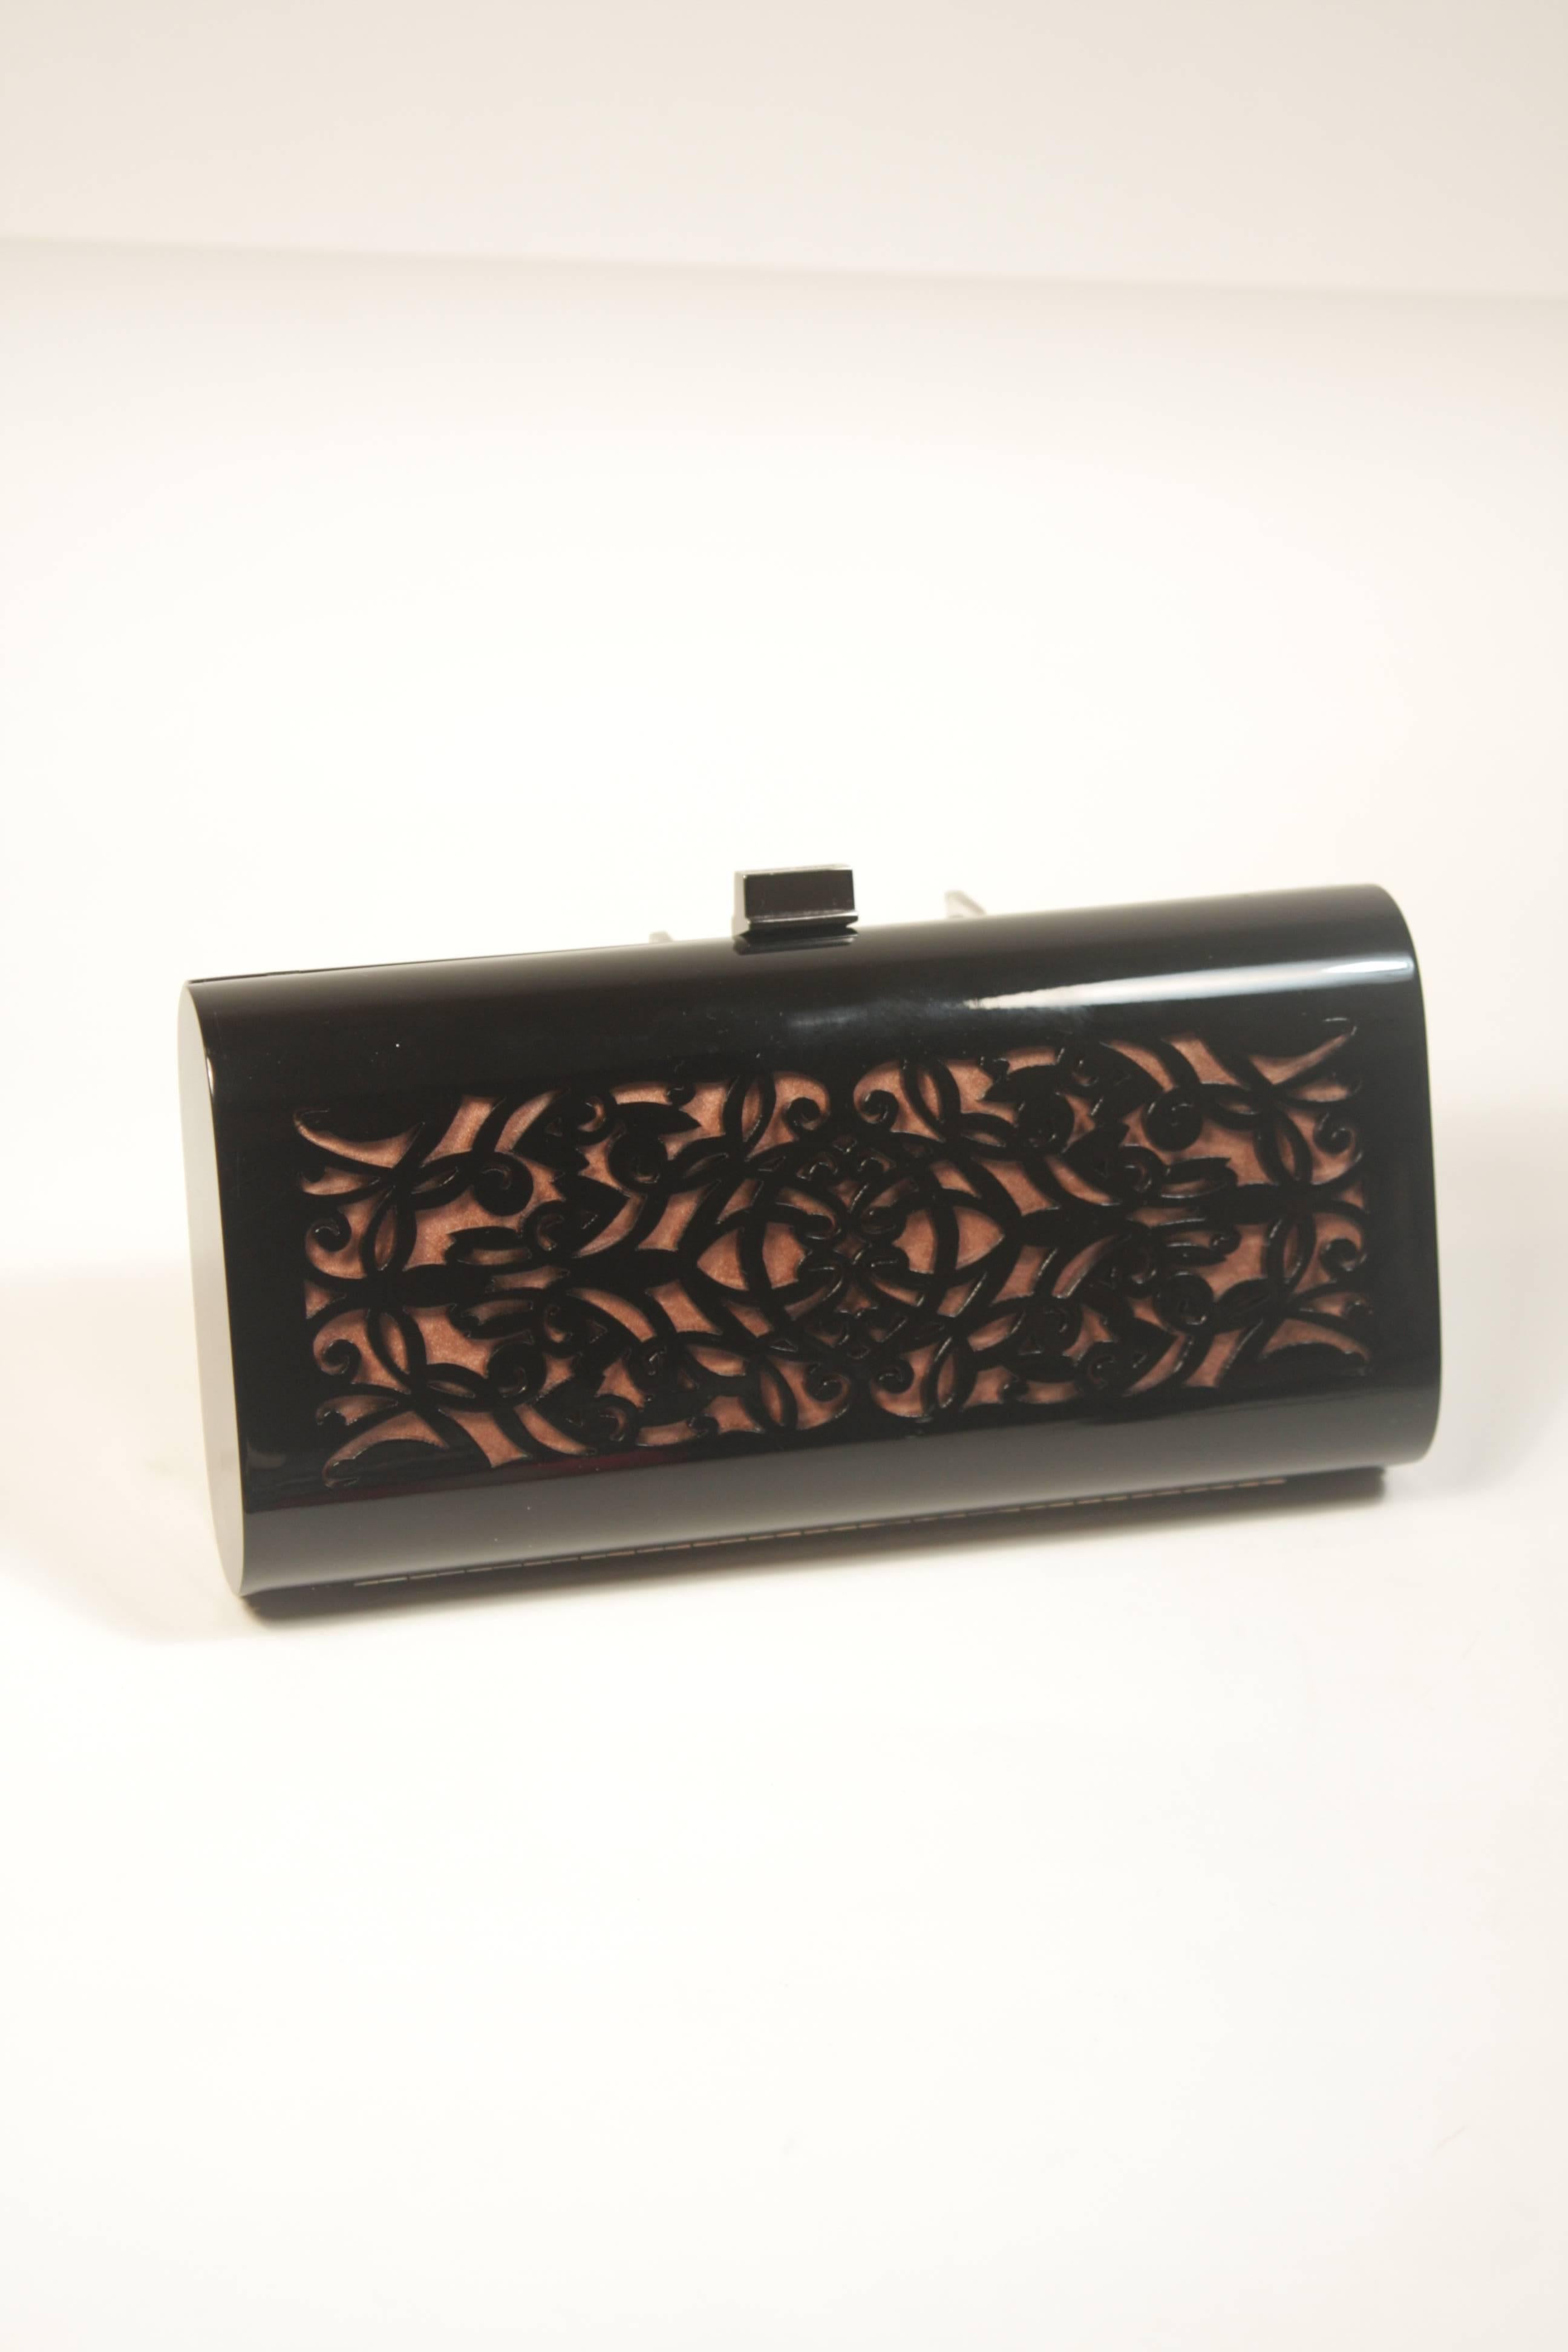 GIORGIO ARMANI Laser Cut Clutch with Optional Satin Strap In Excellent Condition In Los Angeles, CA